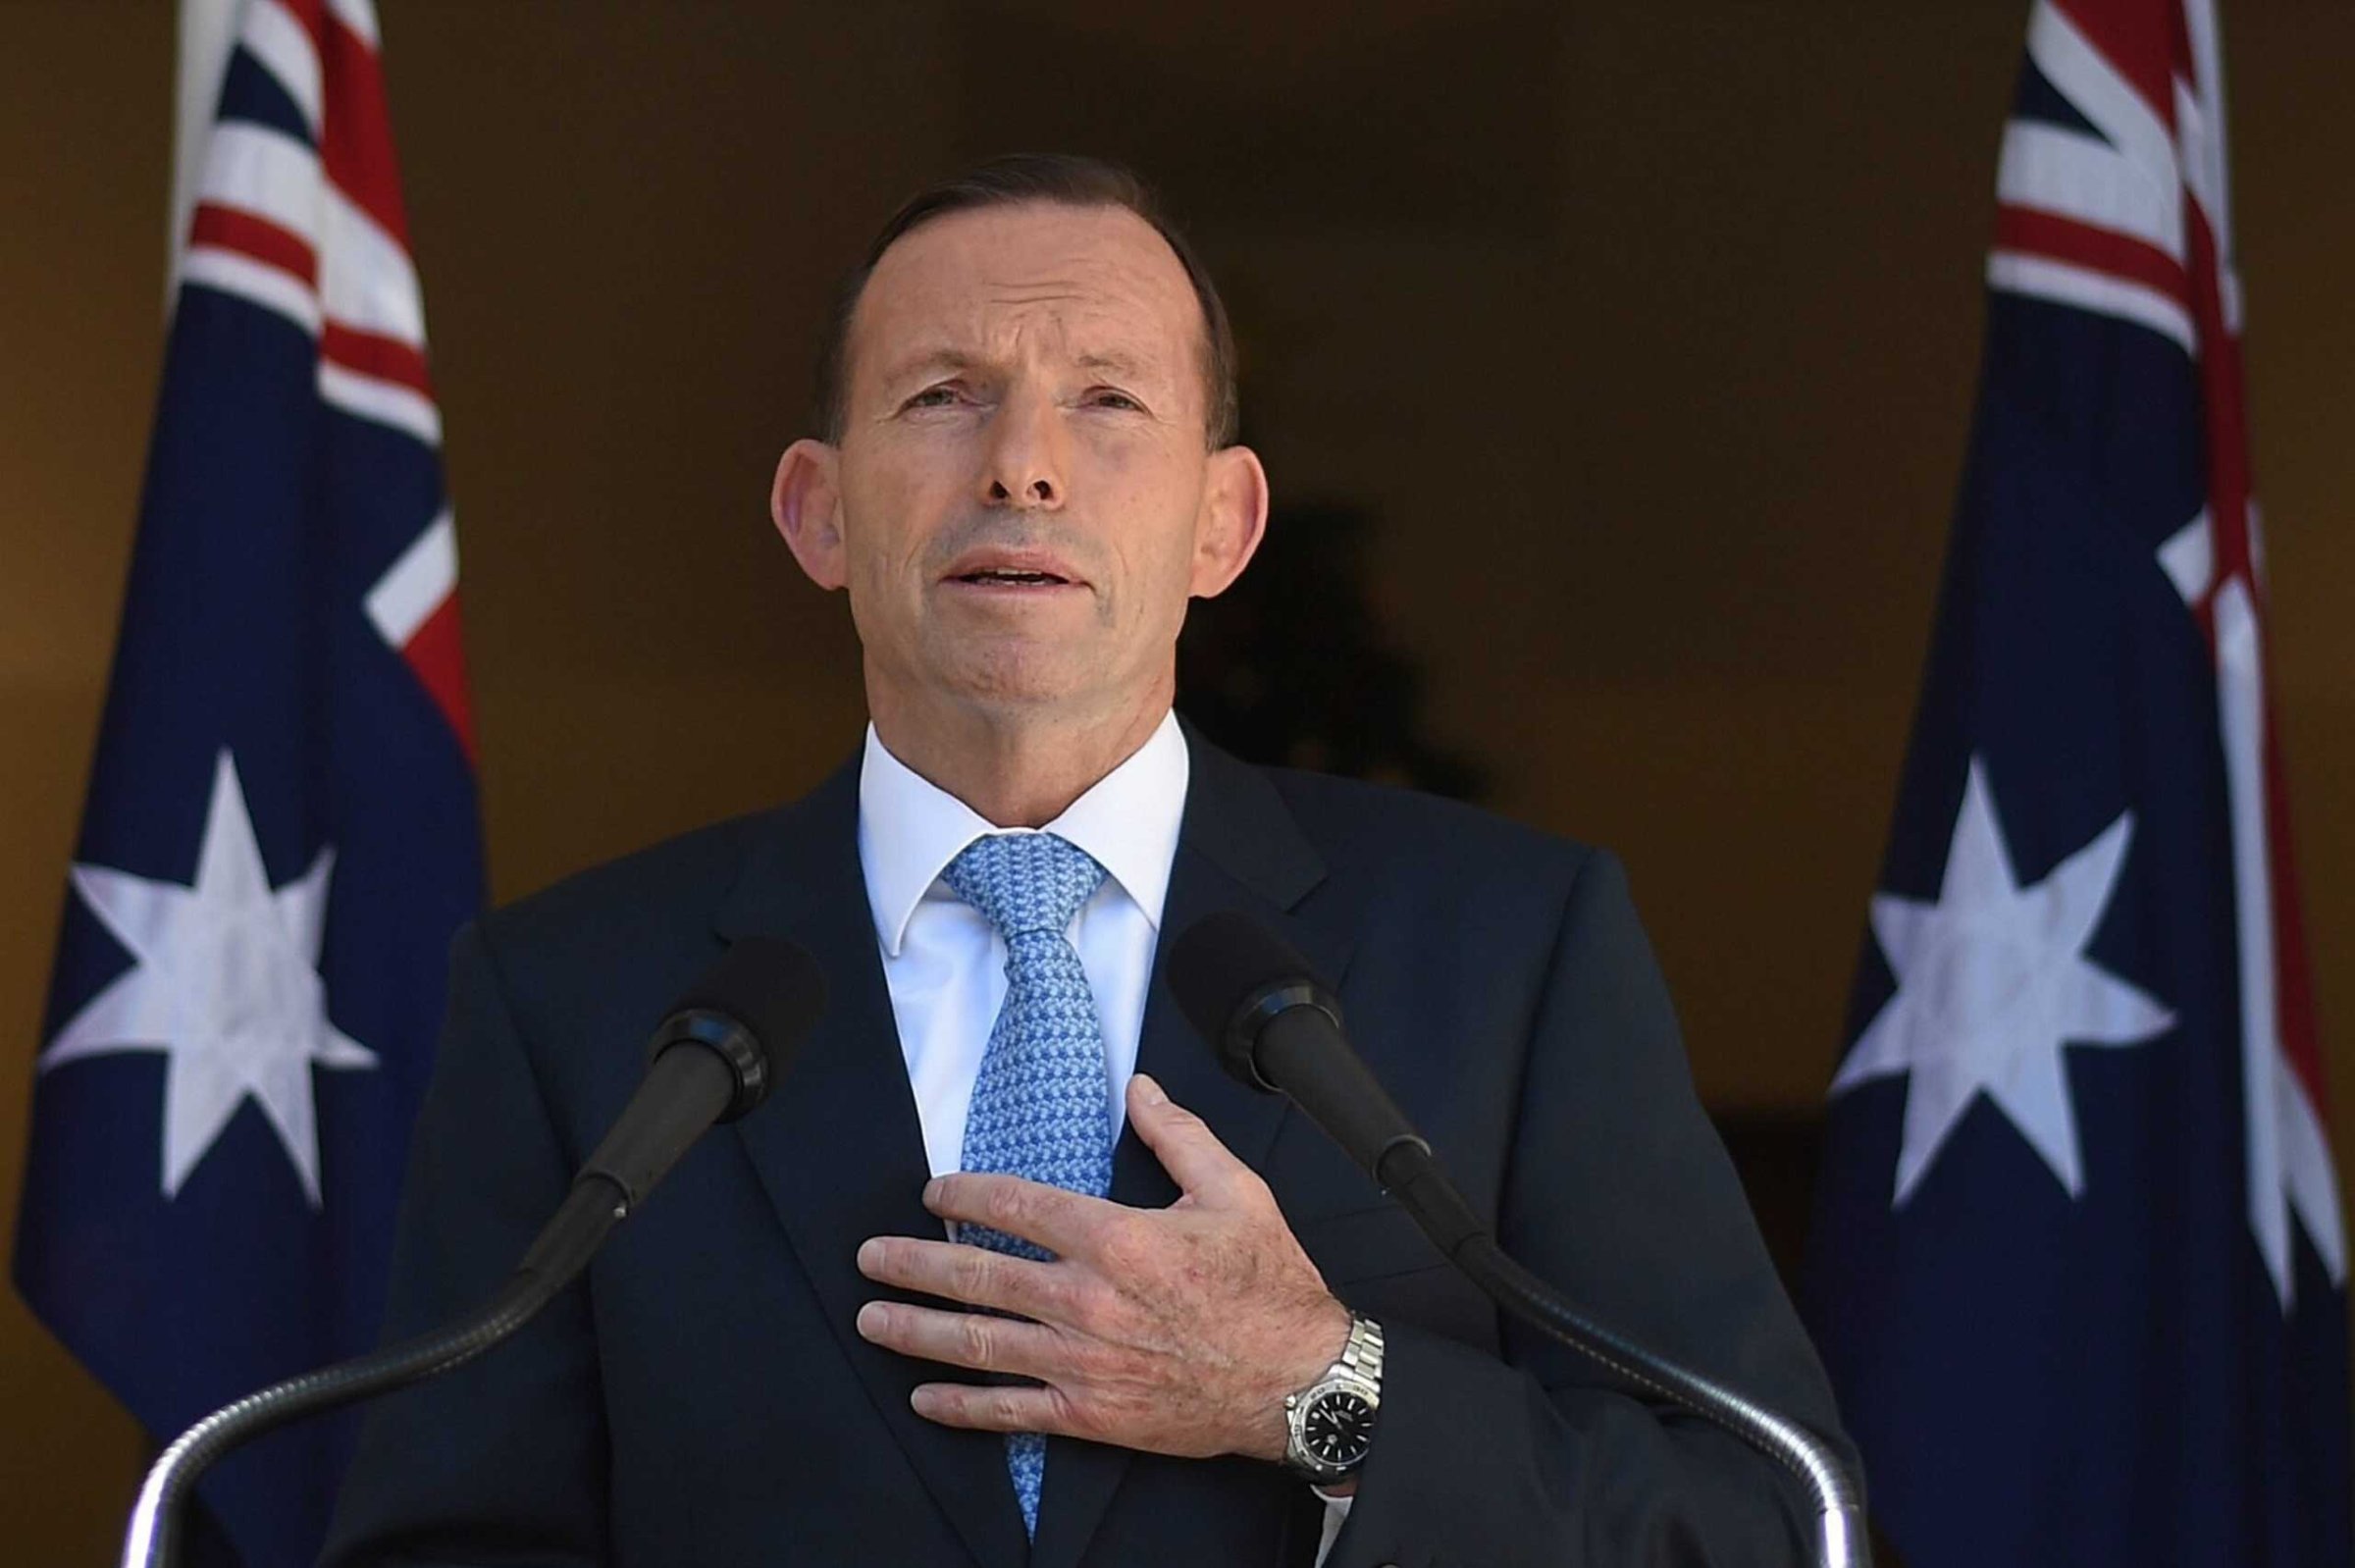 Prime Minister Tony Abbott speaks to the media during a press conference at Parliament House in Canberra, Australia, Dec. 17 2014.